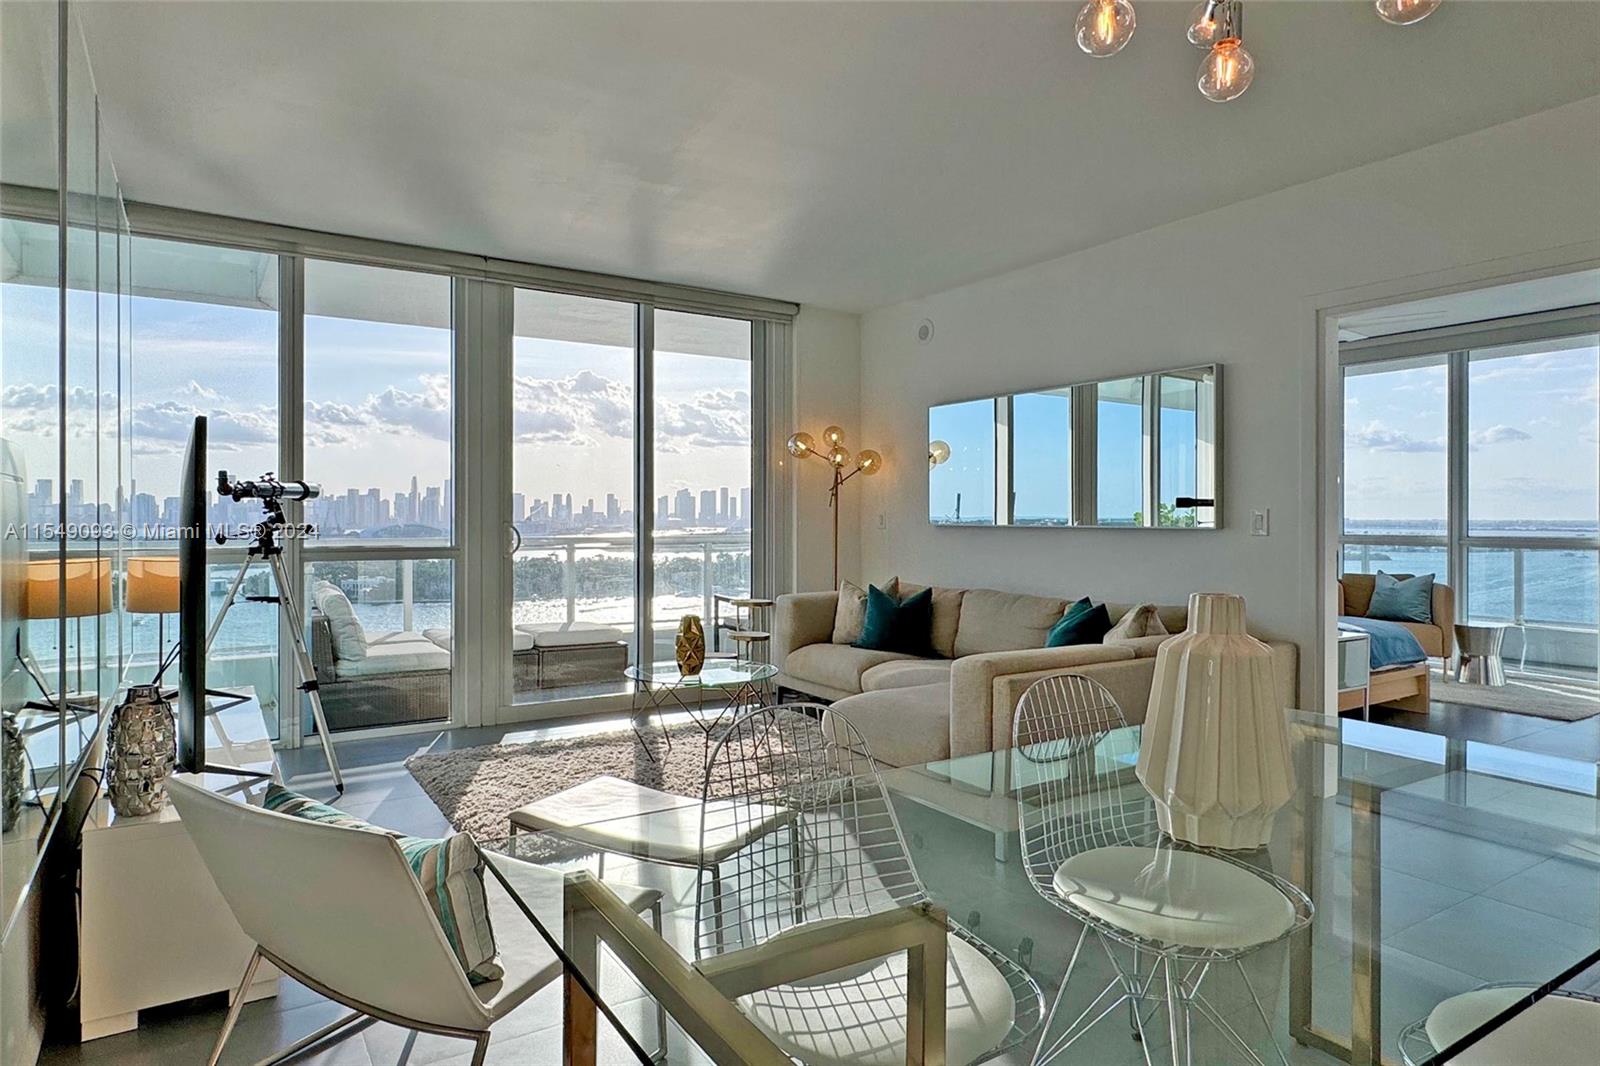 Sitting on the 21st floor in the heart of South Beach and directly on the water, this 2 bed/2 bath condo spans 3 sides of the building with floor-to-ceiling windows and a wrap-around balcony providing breathtaking nearly 360 degree views of Biscayne Bay and the Miami skyline, South Beach and the Atlantic. Fully furnished to high standard, its master bedroom has 2 walk-in closets and a spacious imported marble bathroom, while the 2nd bedroom and bathroom are located on the opposite side of the building creating a private area for guests/children. Kitchen includes stainless appliances & marble countertops. The exclusive Bentley Bay includes a state-of-the-art gym, sauna, hammam, cold plunge, pool deck with 2 spas, & valet parking. 30-day rentals permitted. Available April 1st, 2024